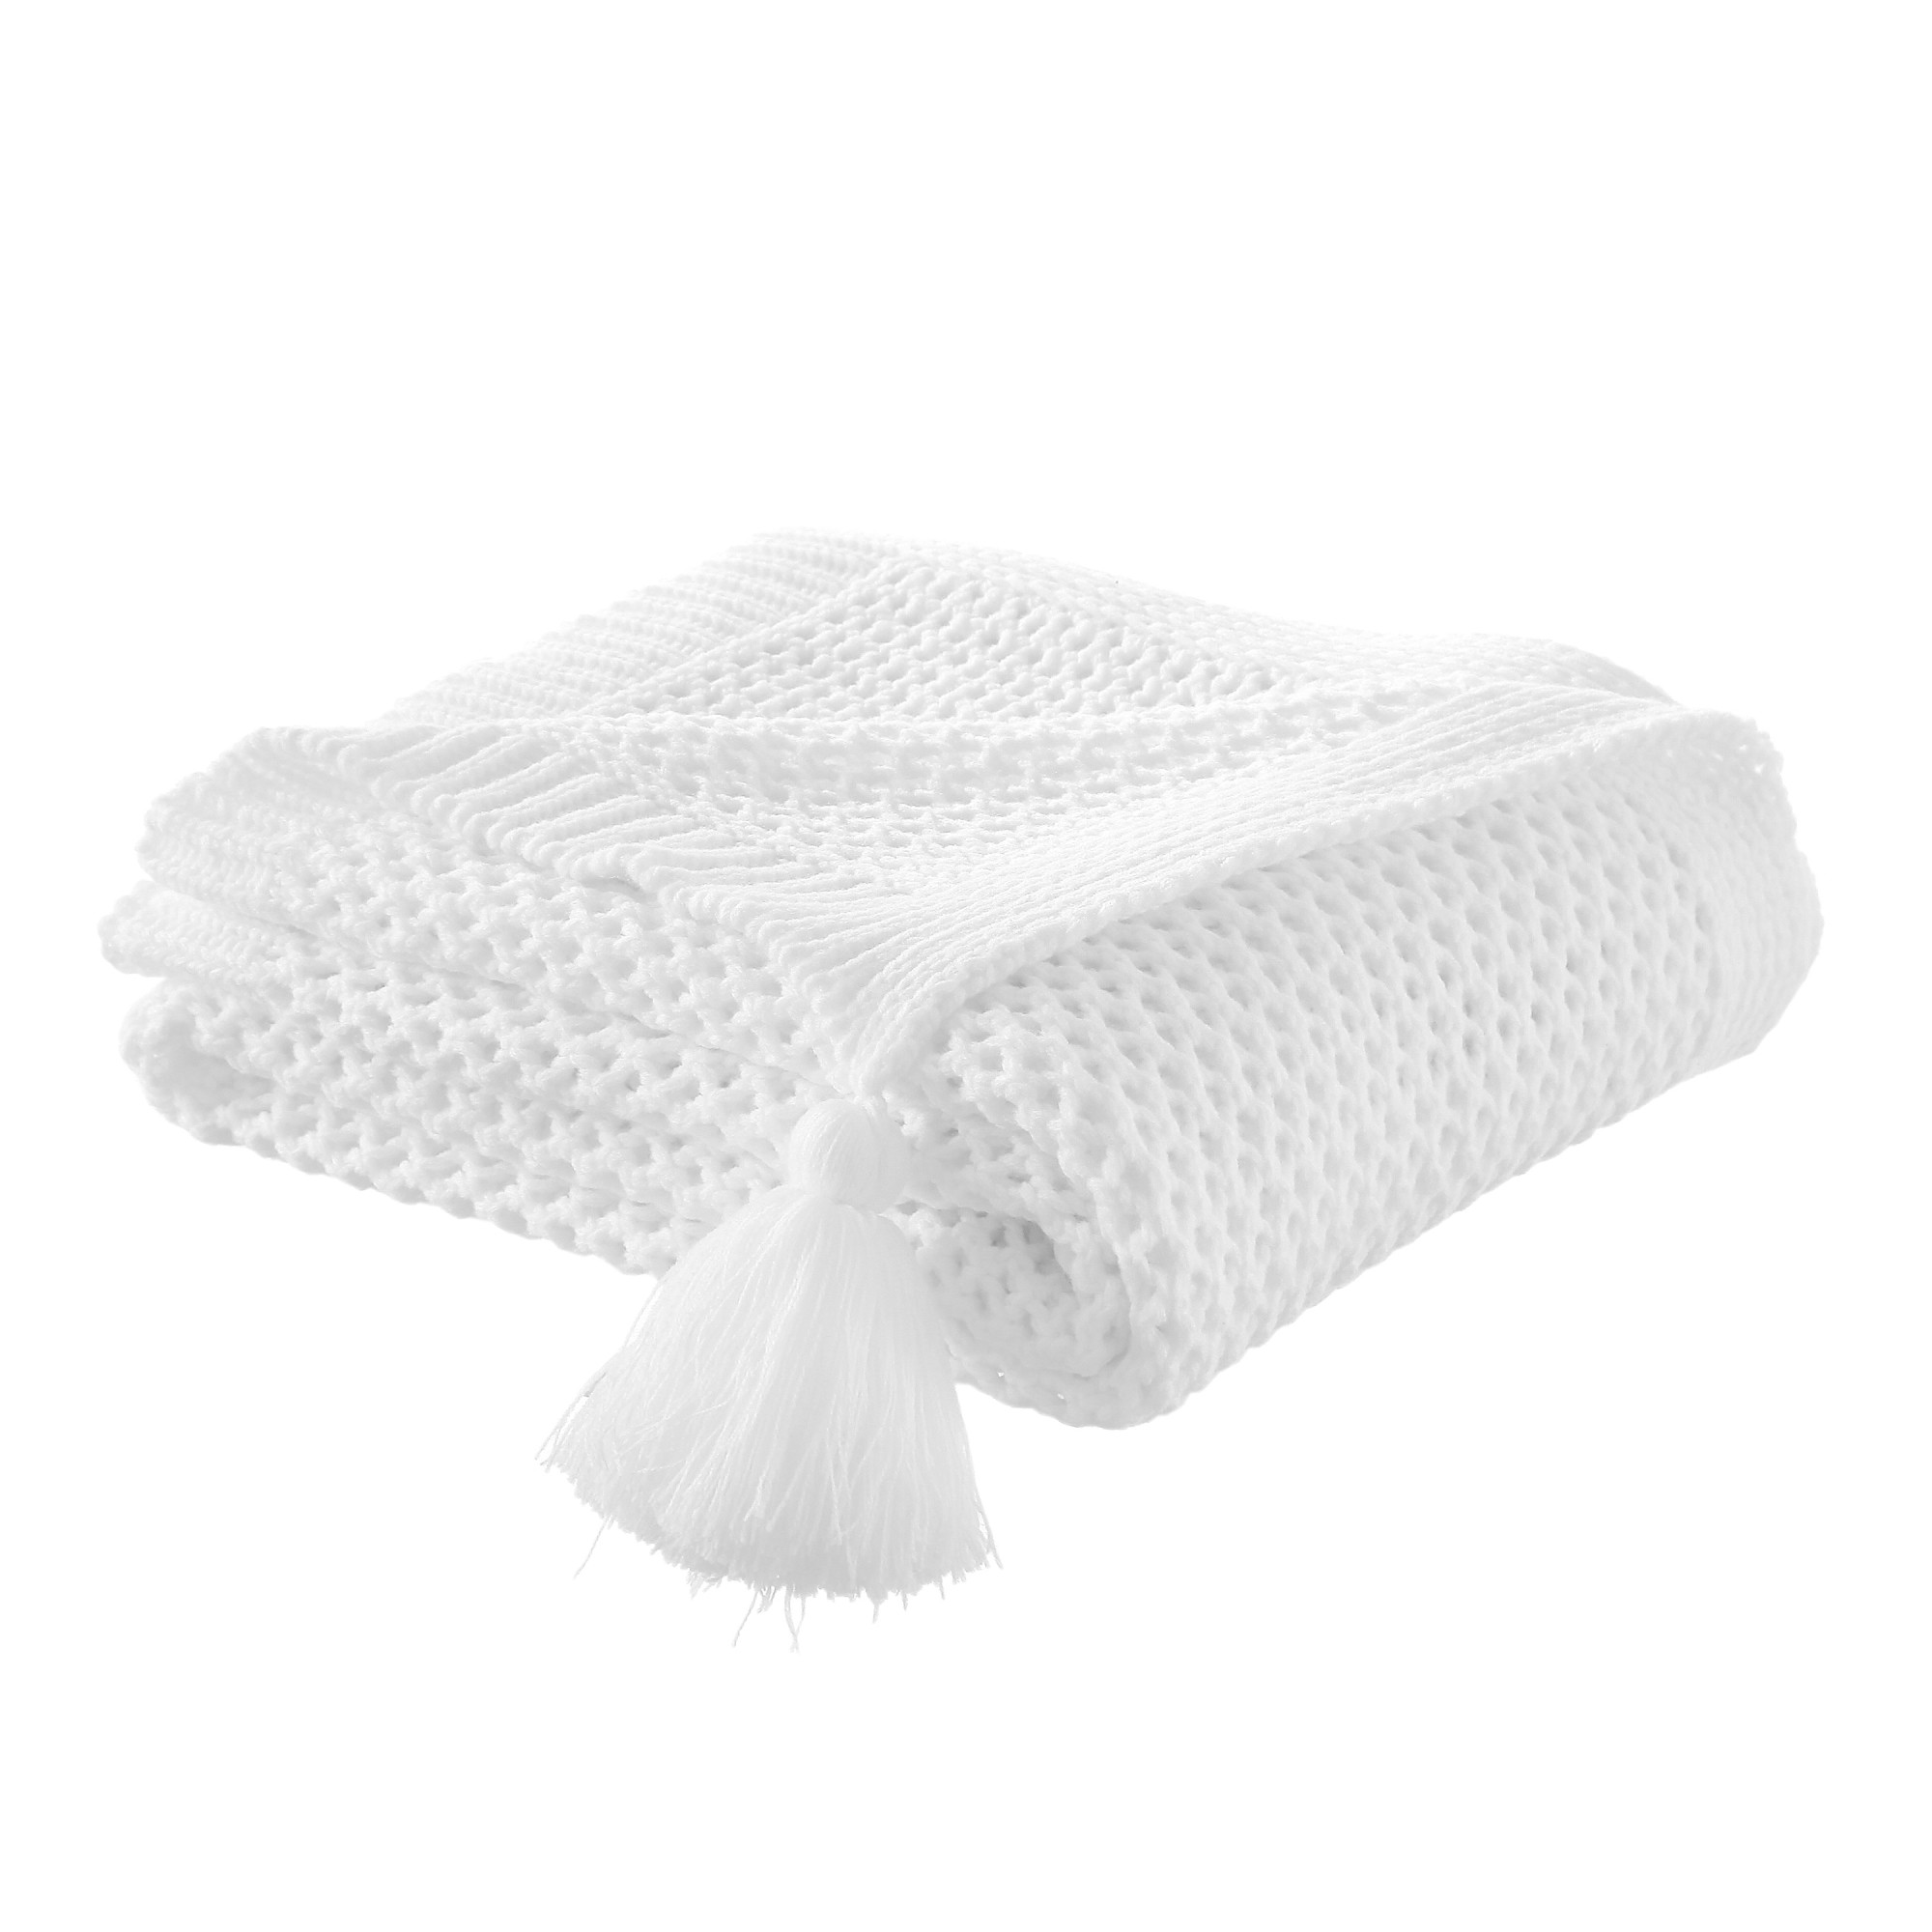 White Knitted Acrylic Solid Color Throw Blanket-531317-1